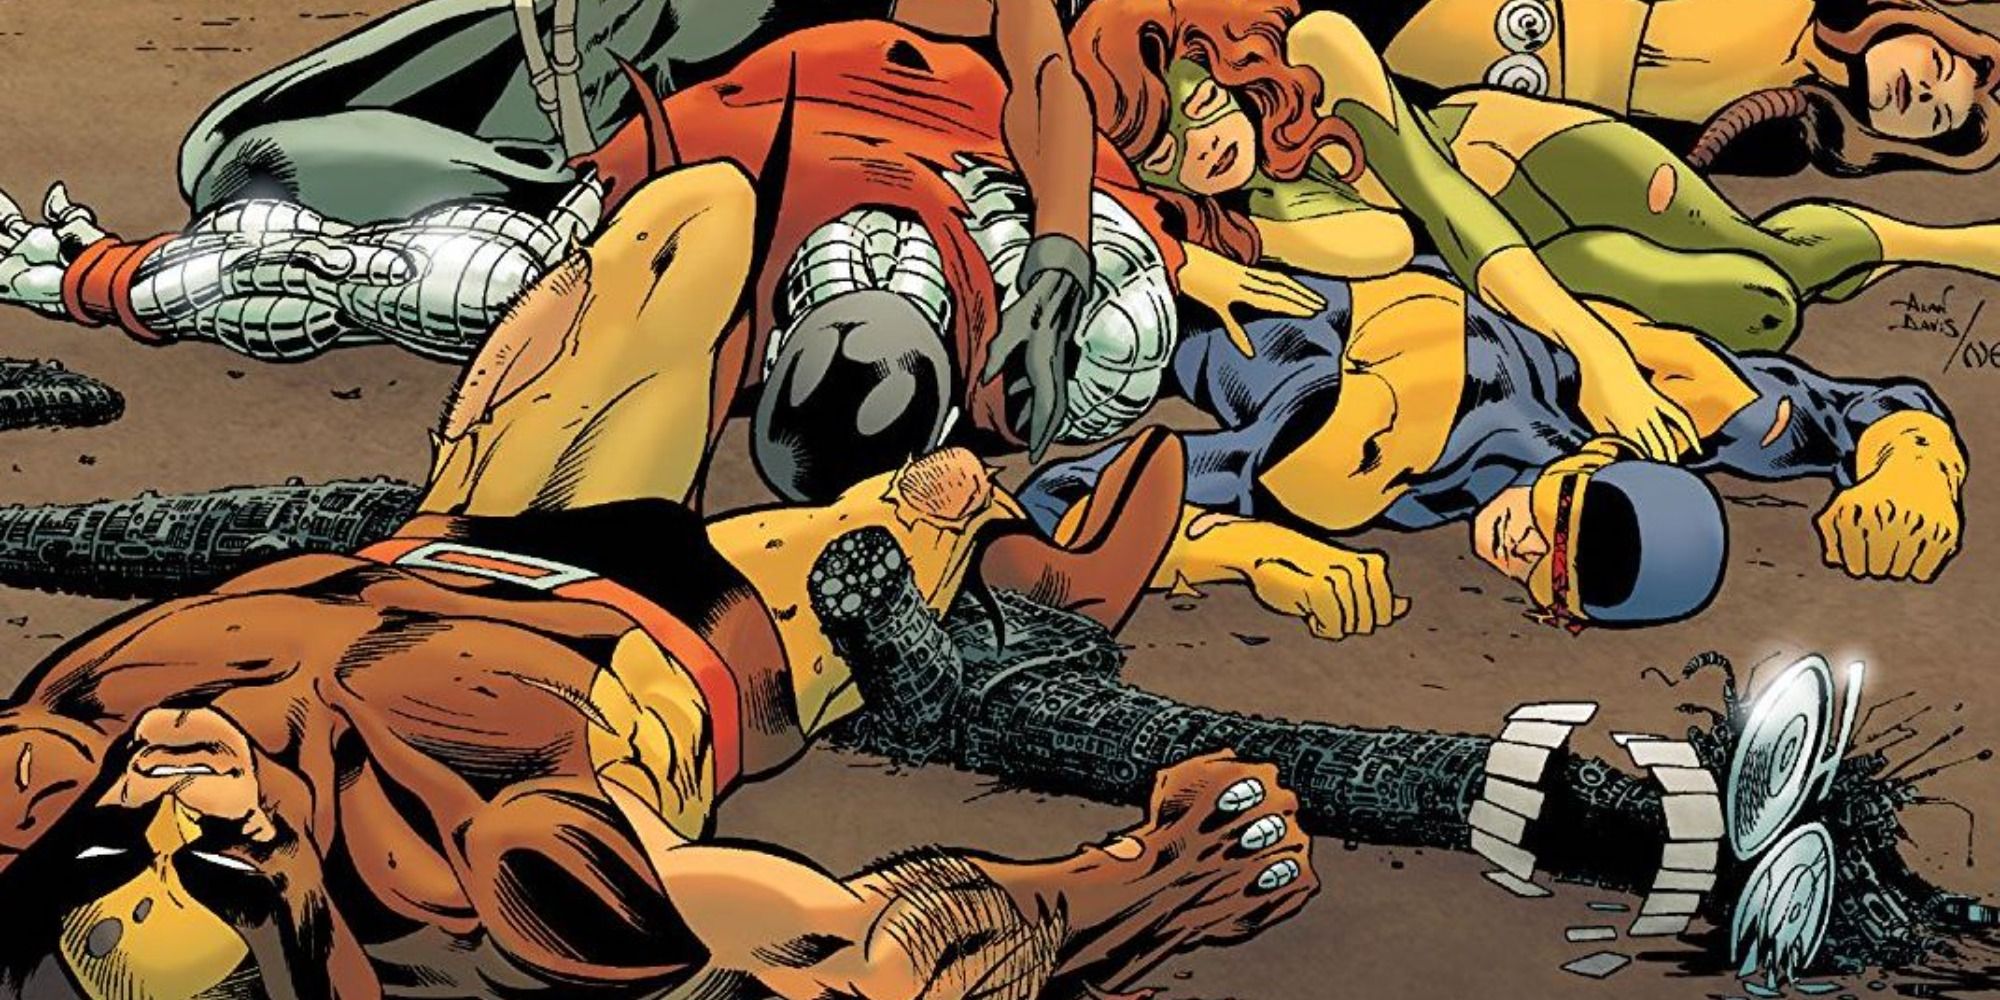 X-Men lie defeated in The Fall of the Mutants comics.